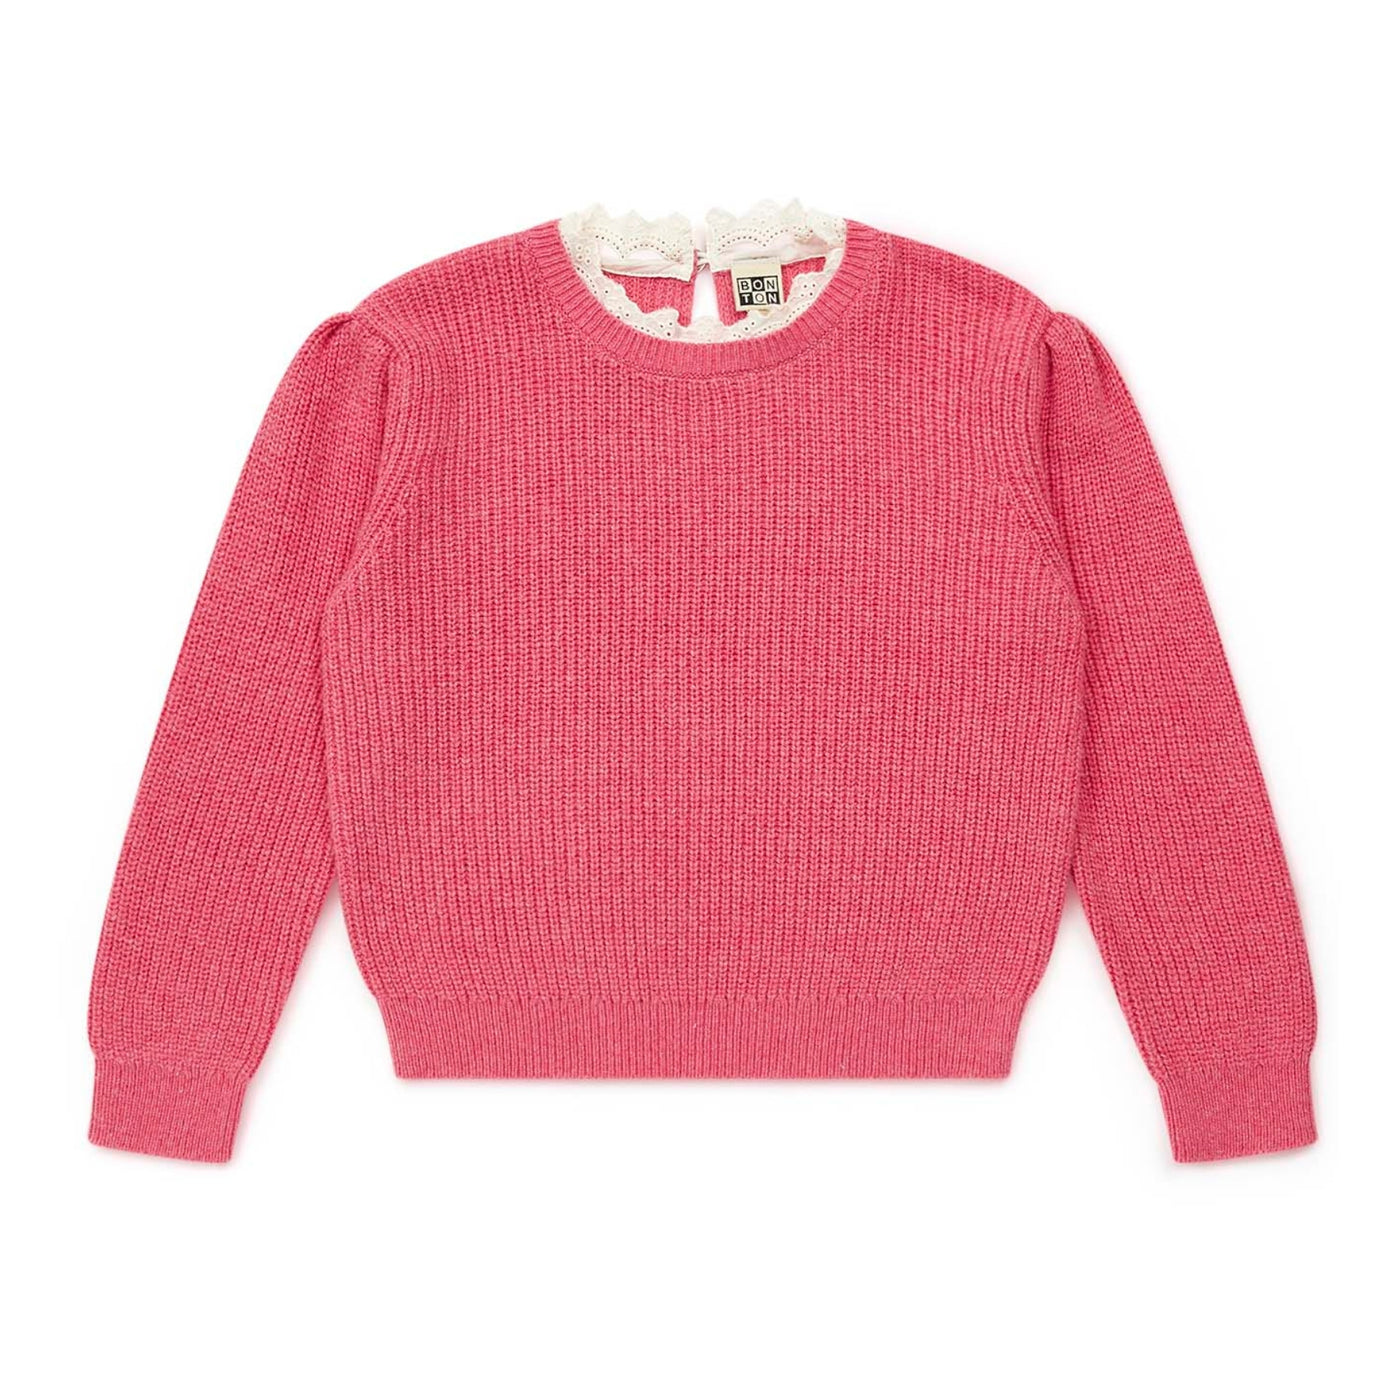 Lace Collar Sweater in Rose Be Fresh